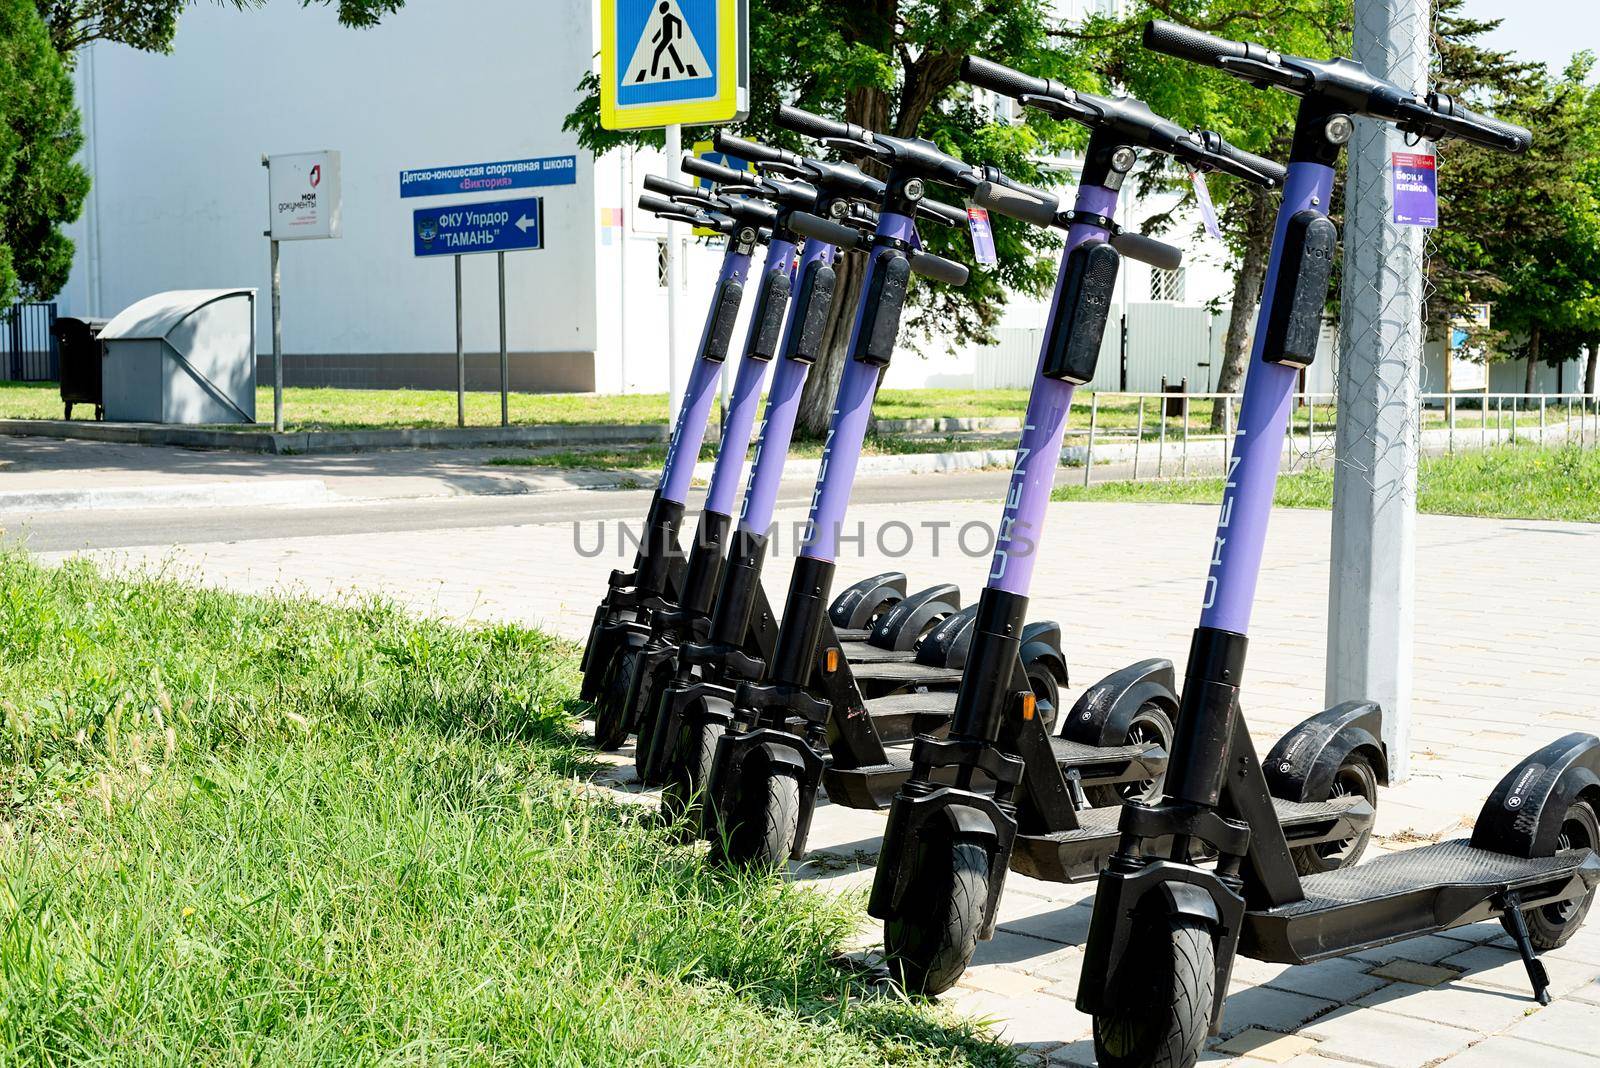 Anapa, Russia - 24 July 2021: URent electric scooters in a row on a parking